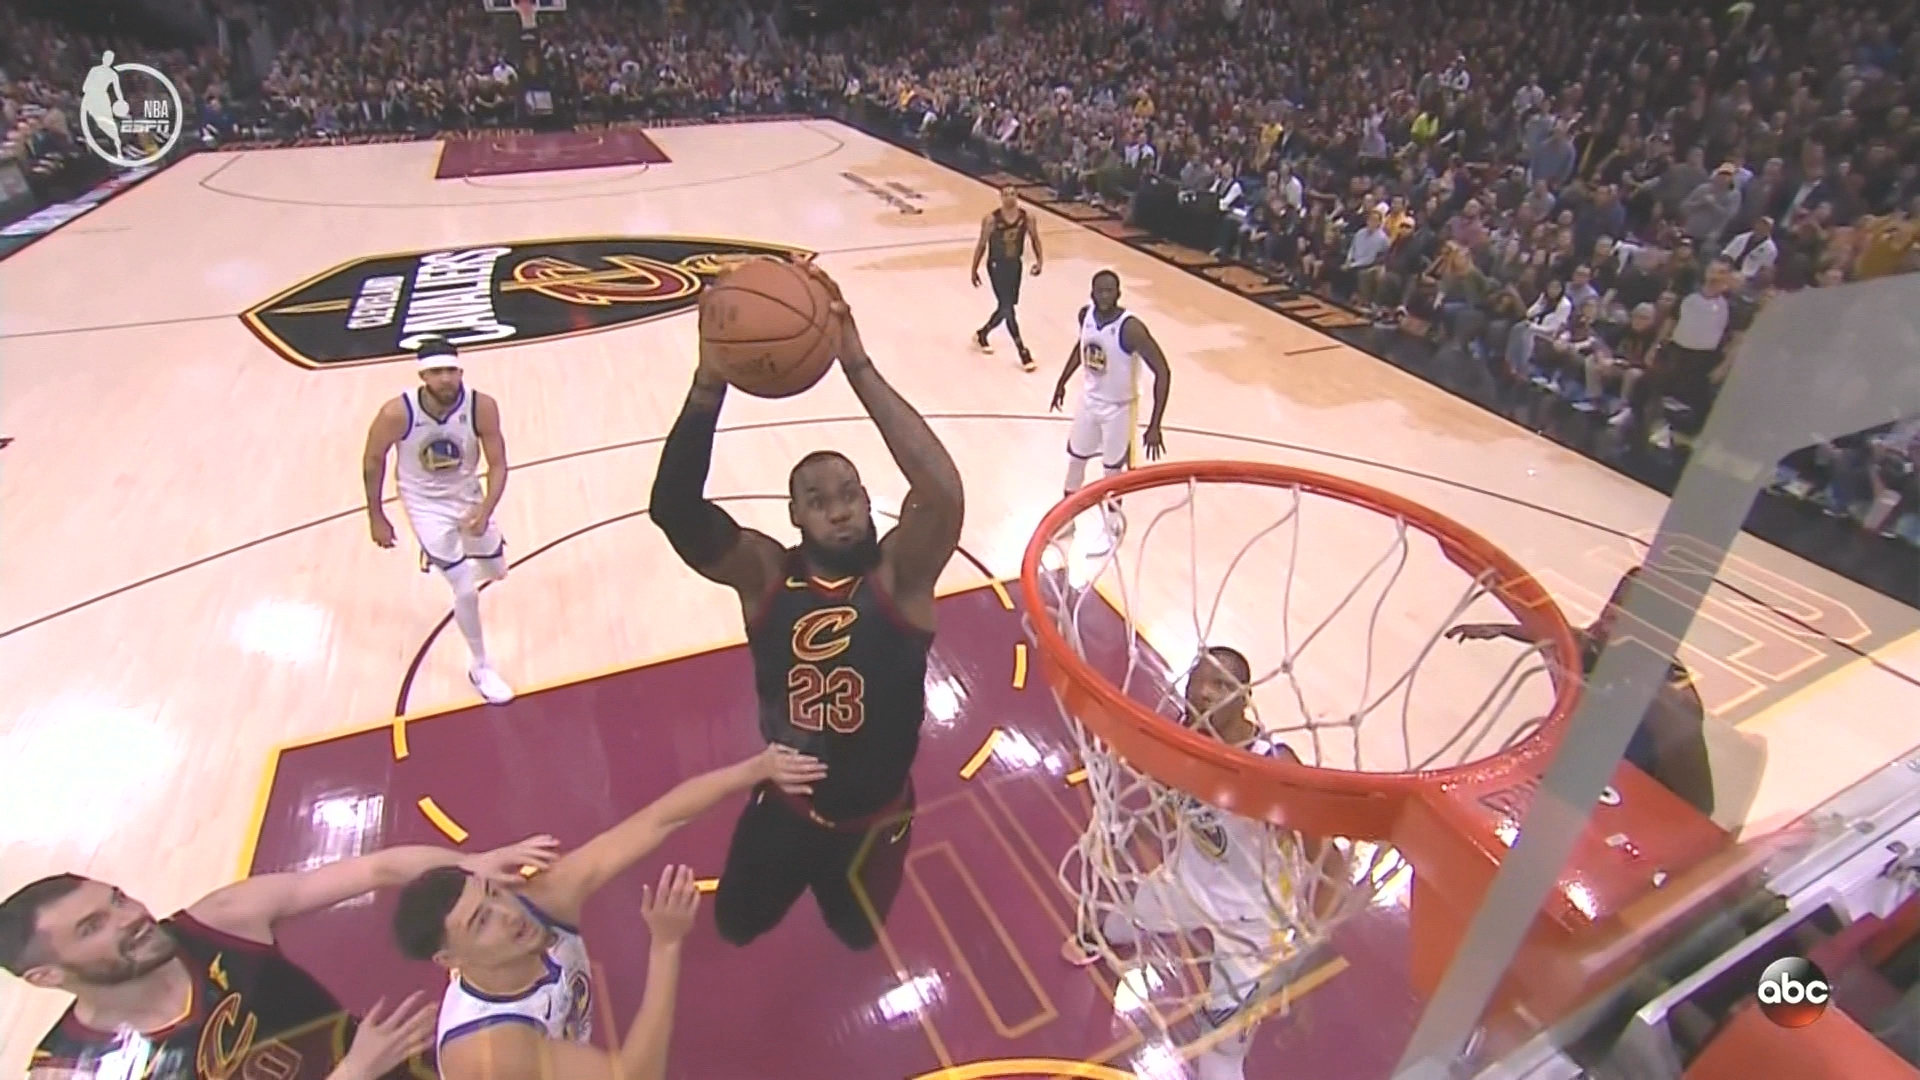 LeBron James soars for reverse alley-oop with head in the mesh